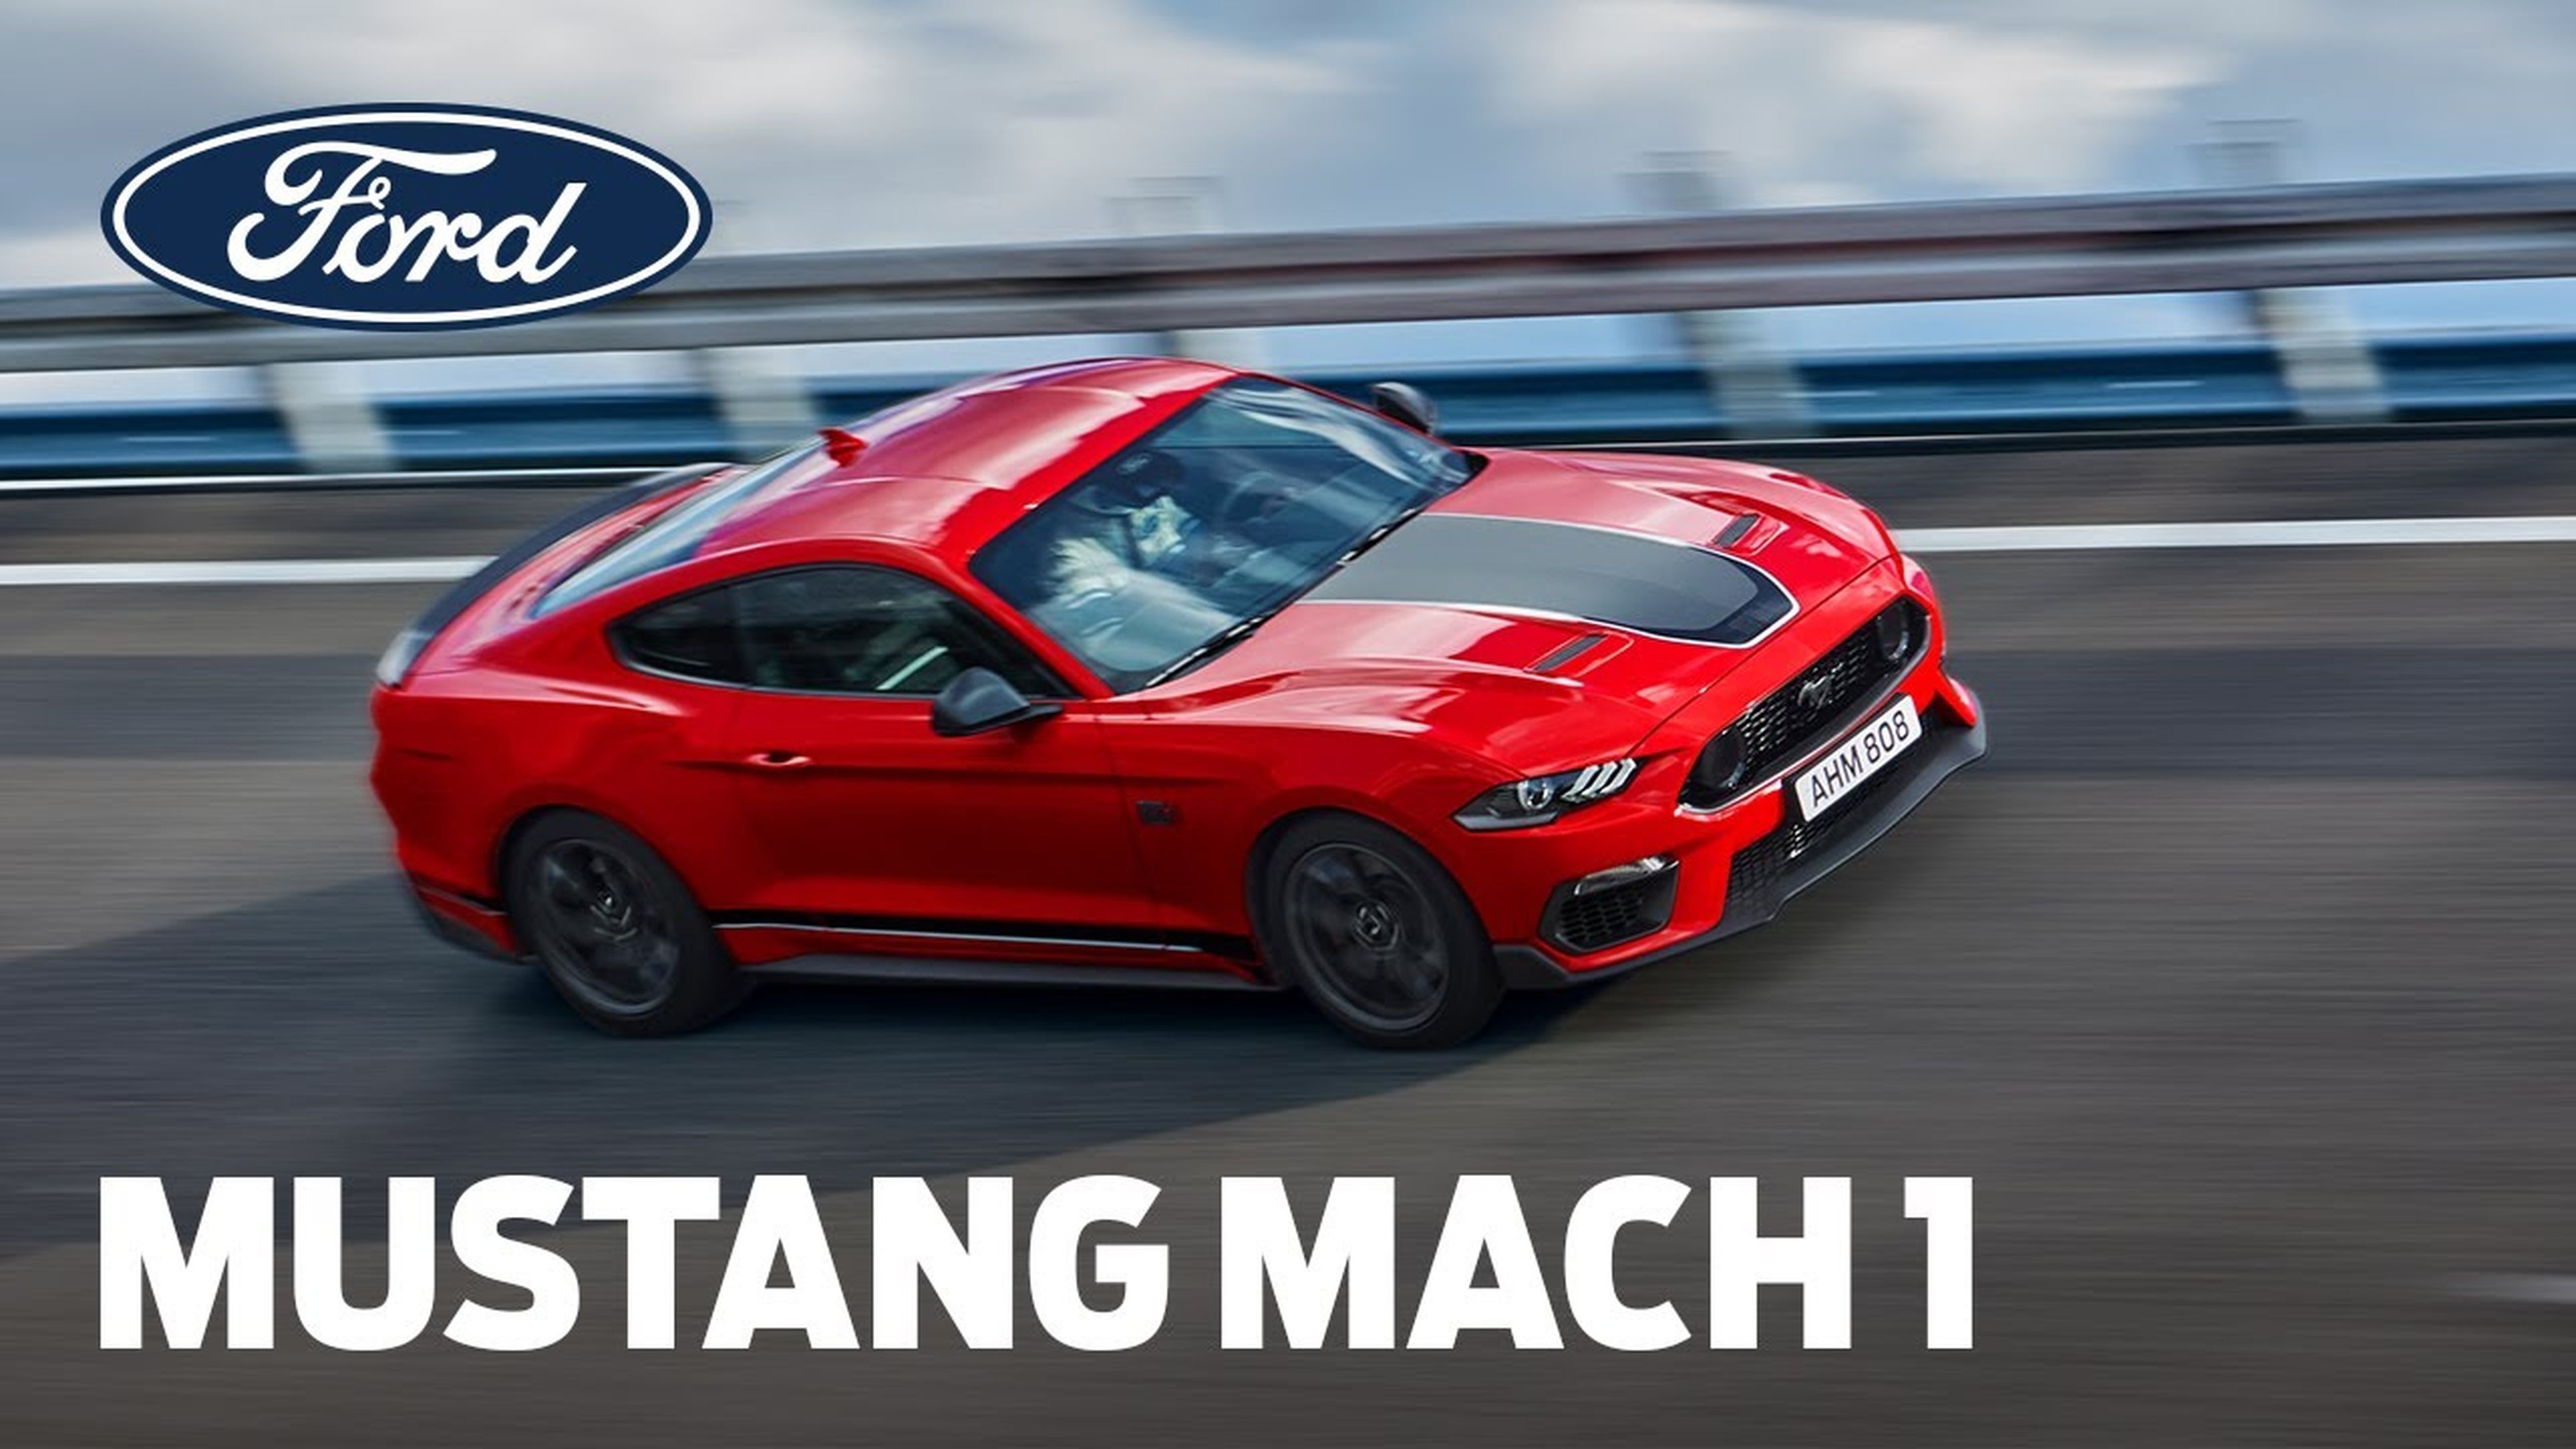 How fast is the new Ford Mustang Mach 1?